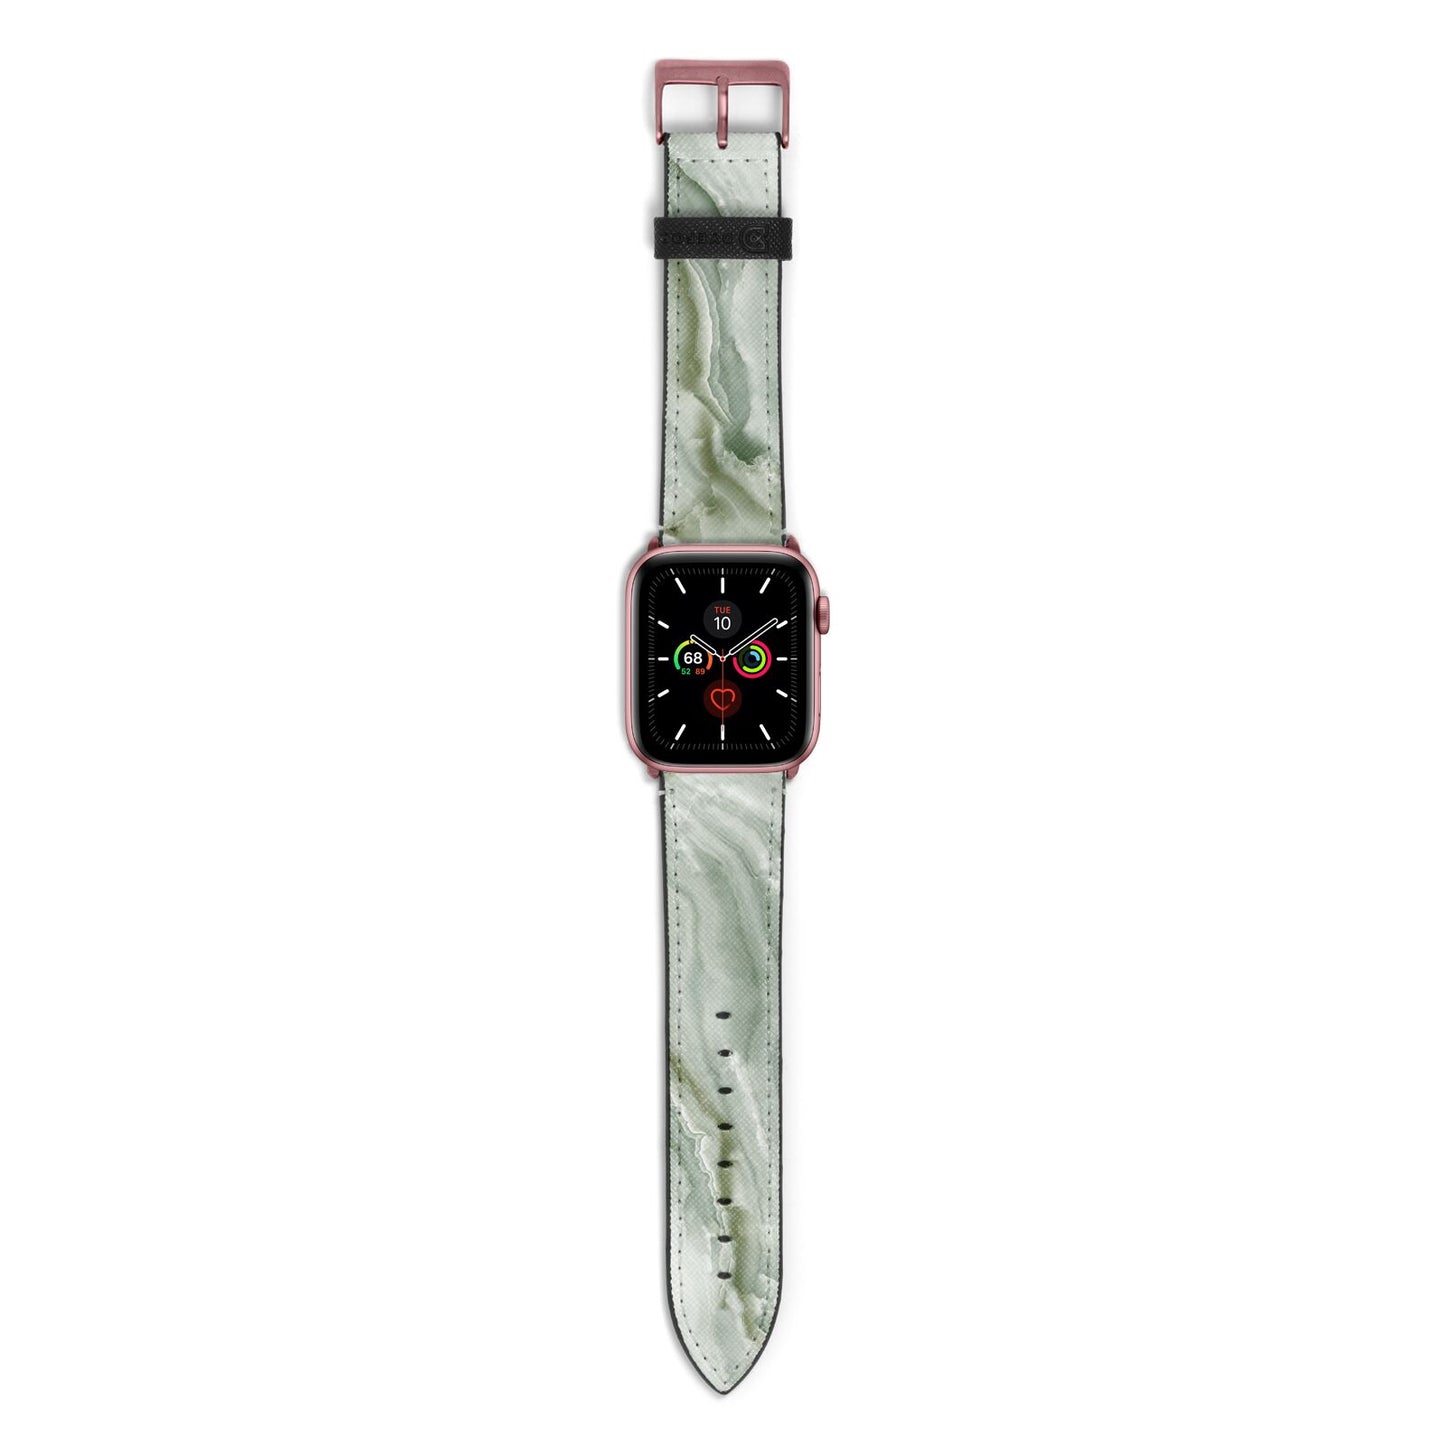 Pistachio Green Marble Apple Watch Strap with Rose Gold Hardware